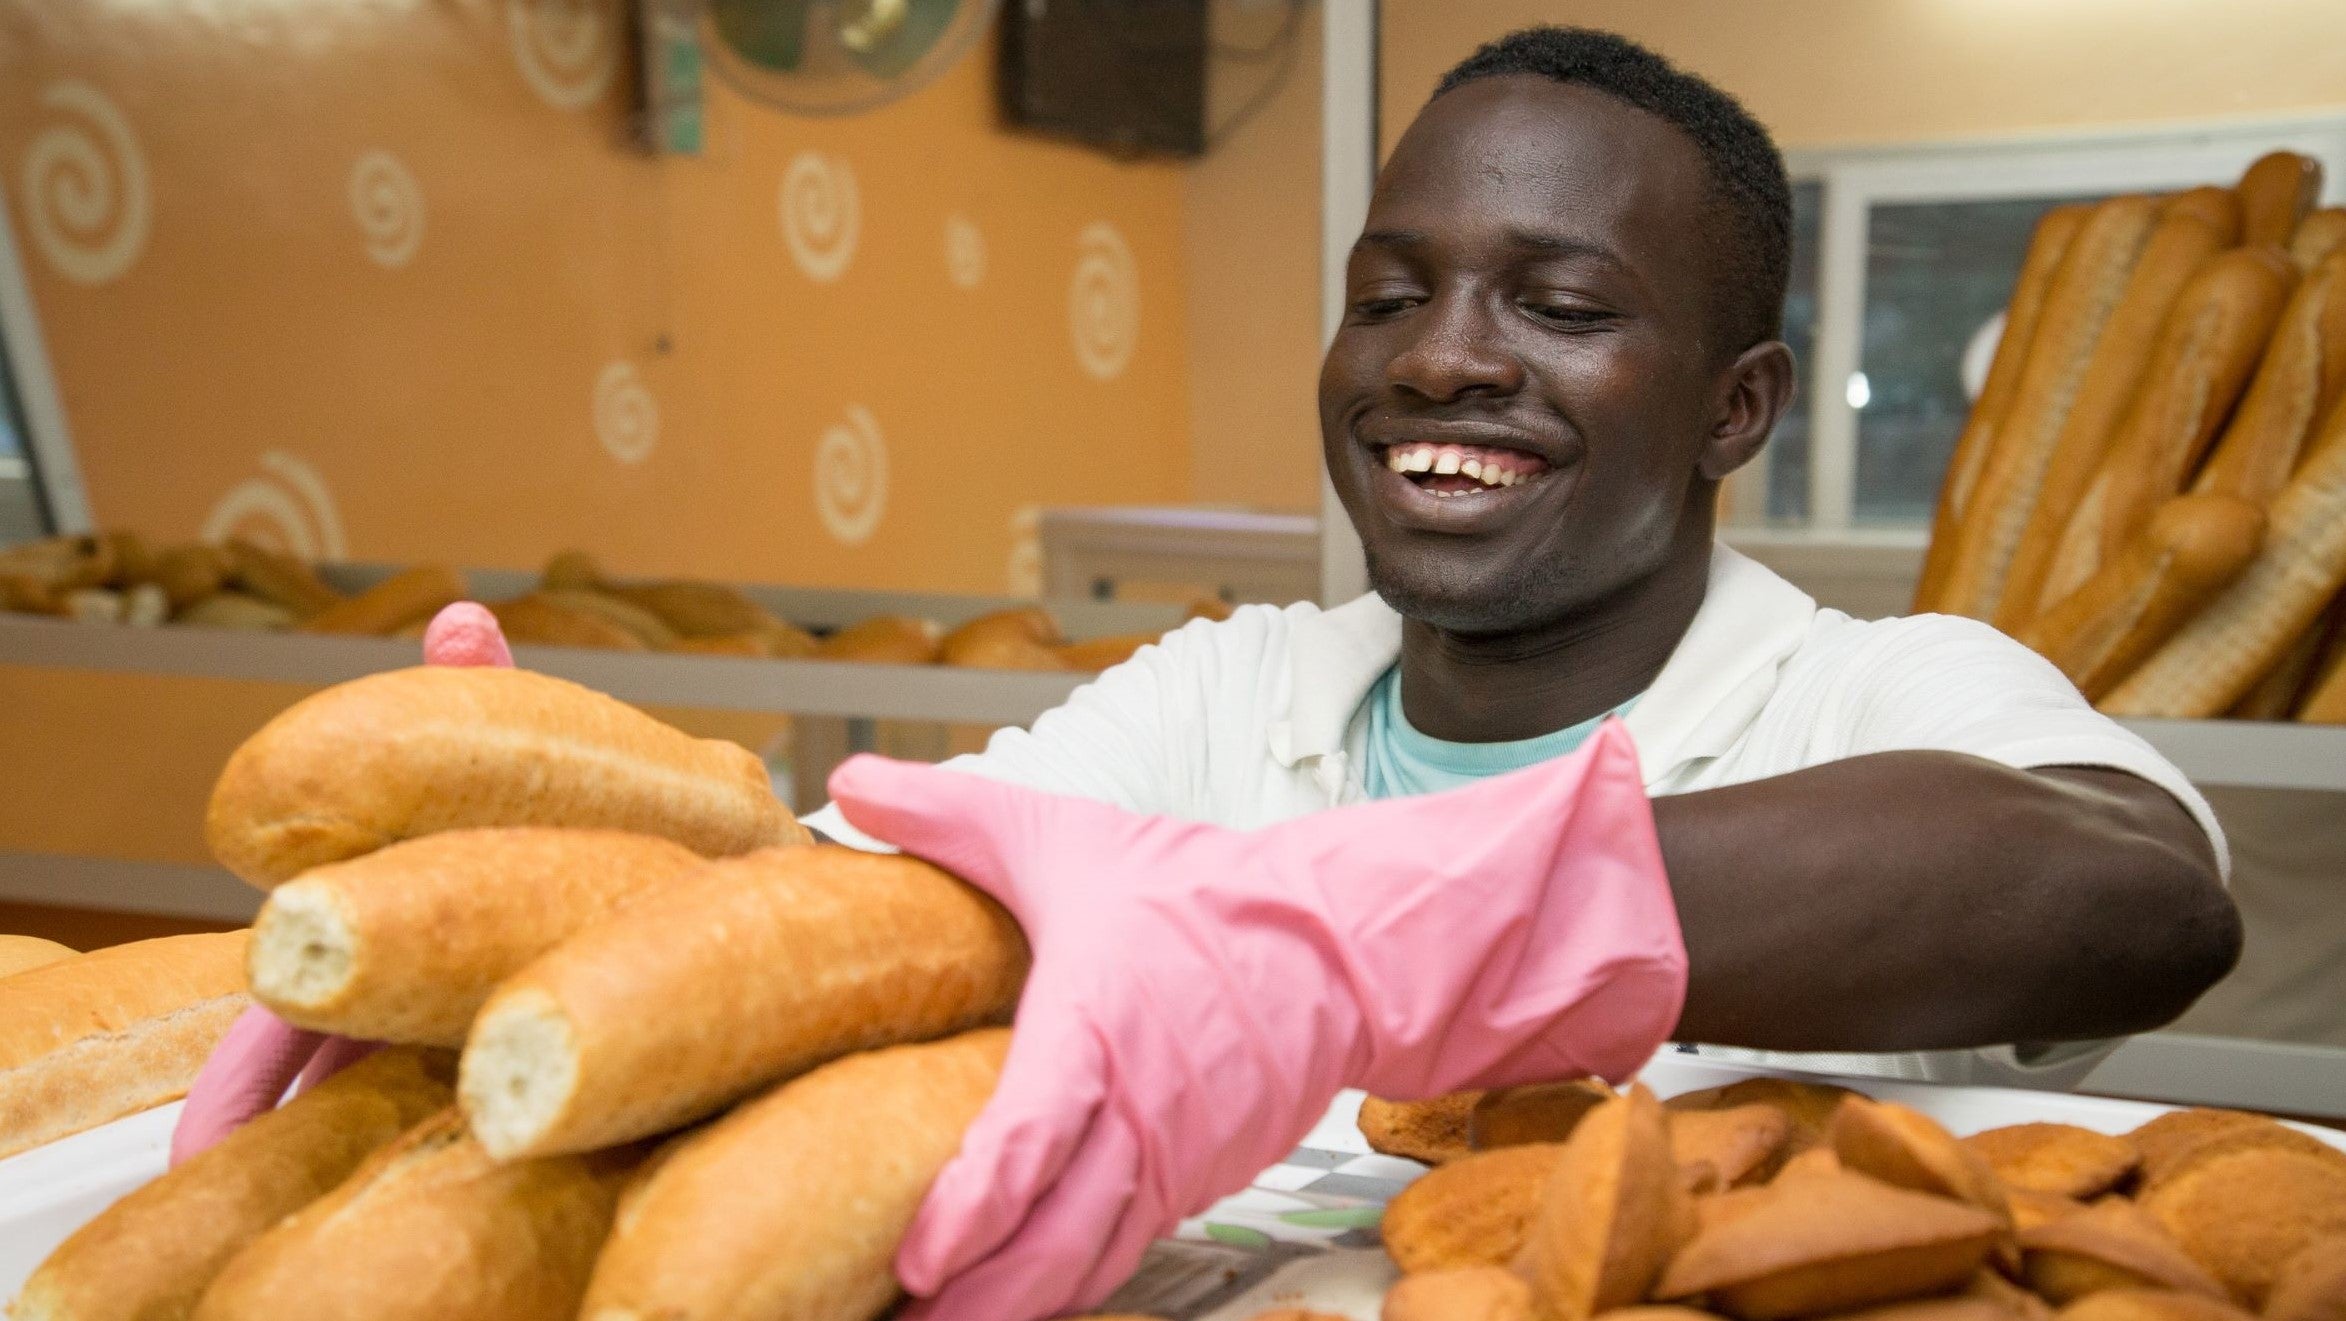 A young man working in the food industry in Senegal.